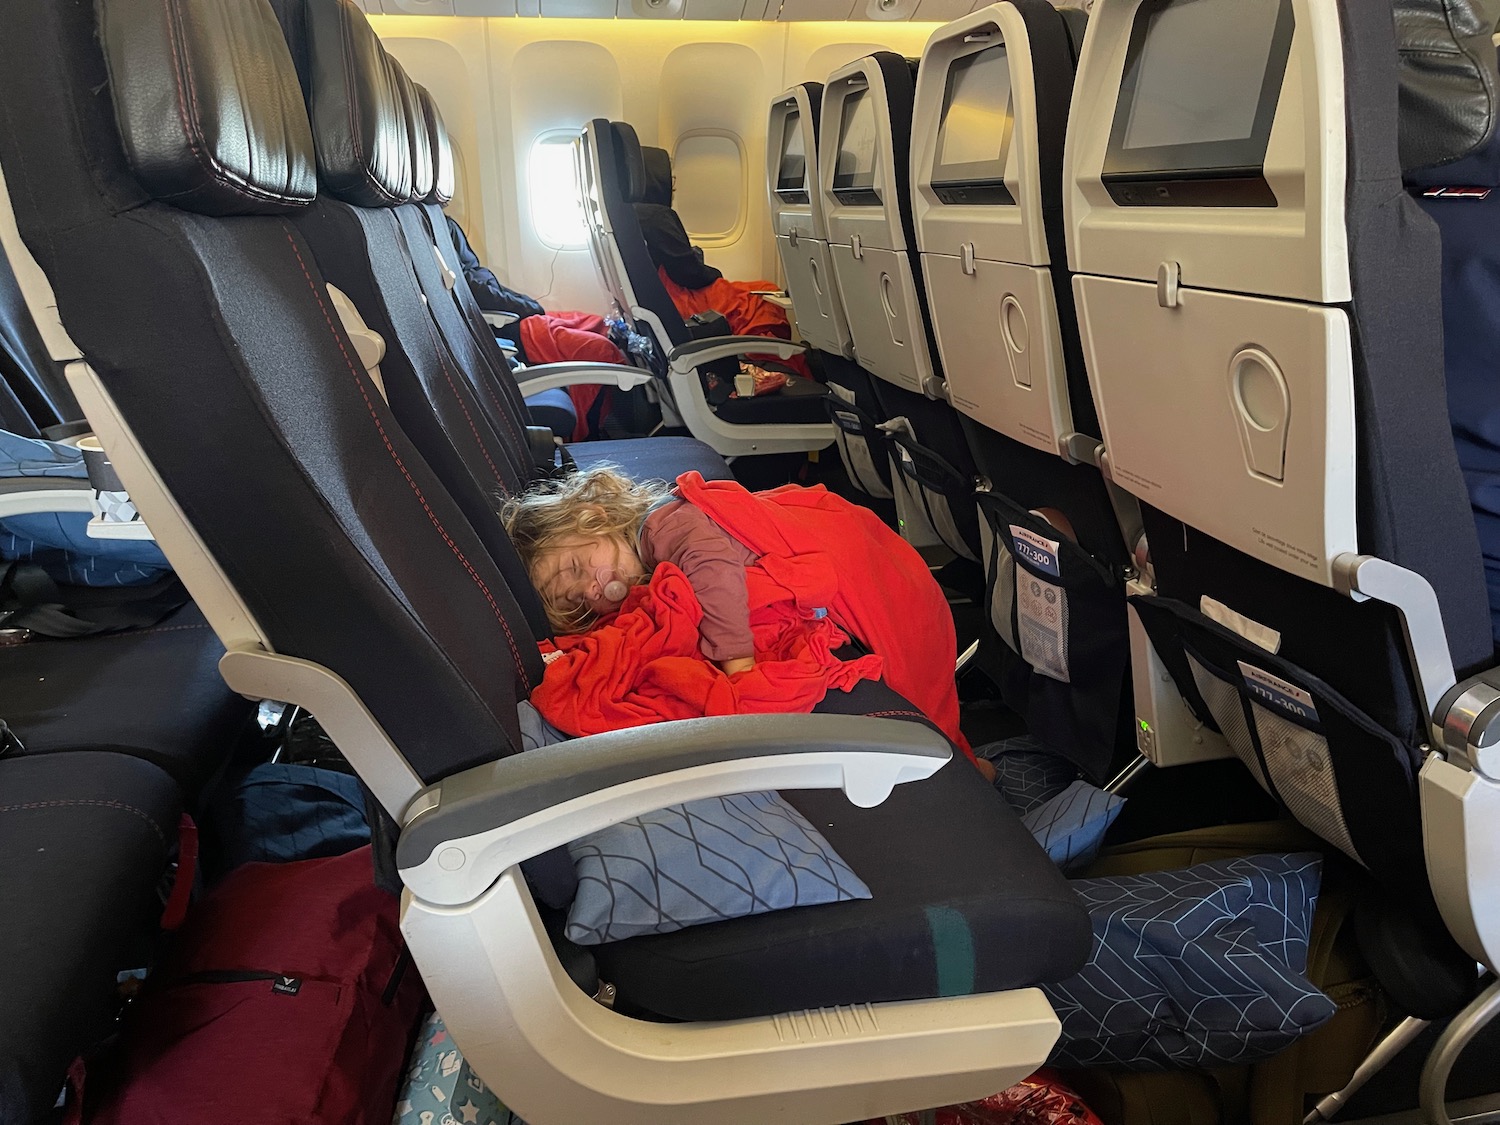 a child sleeping on an airplane seat